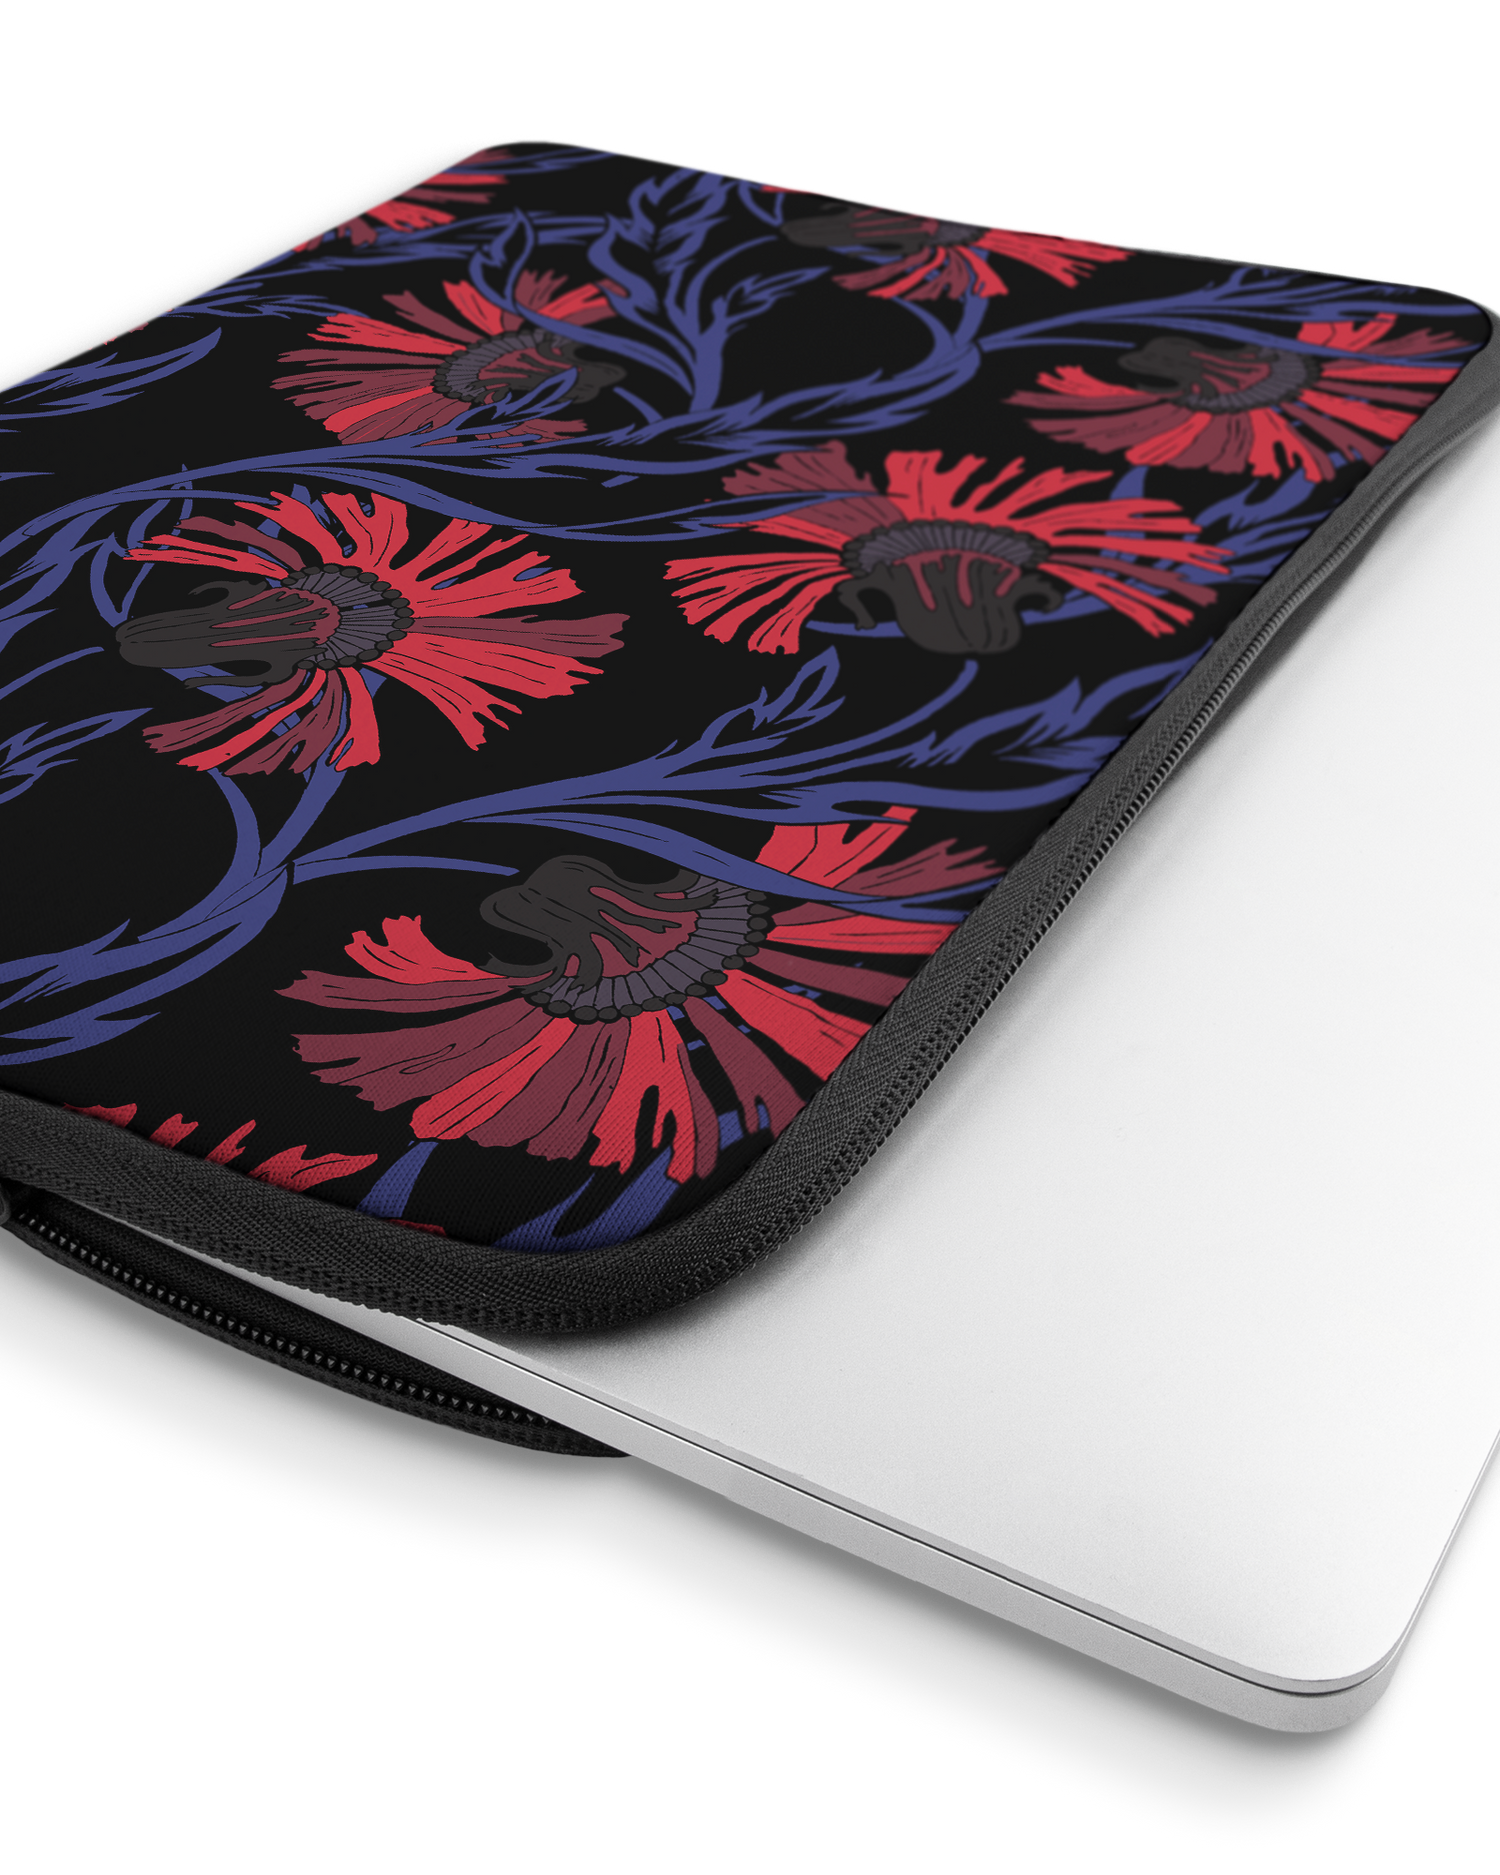 Midnight Floral Laptop Case 16 inch with device inside